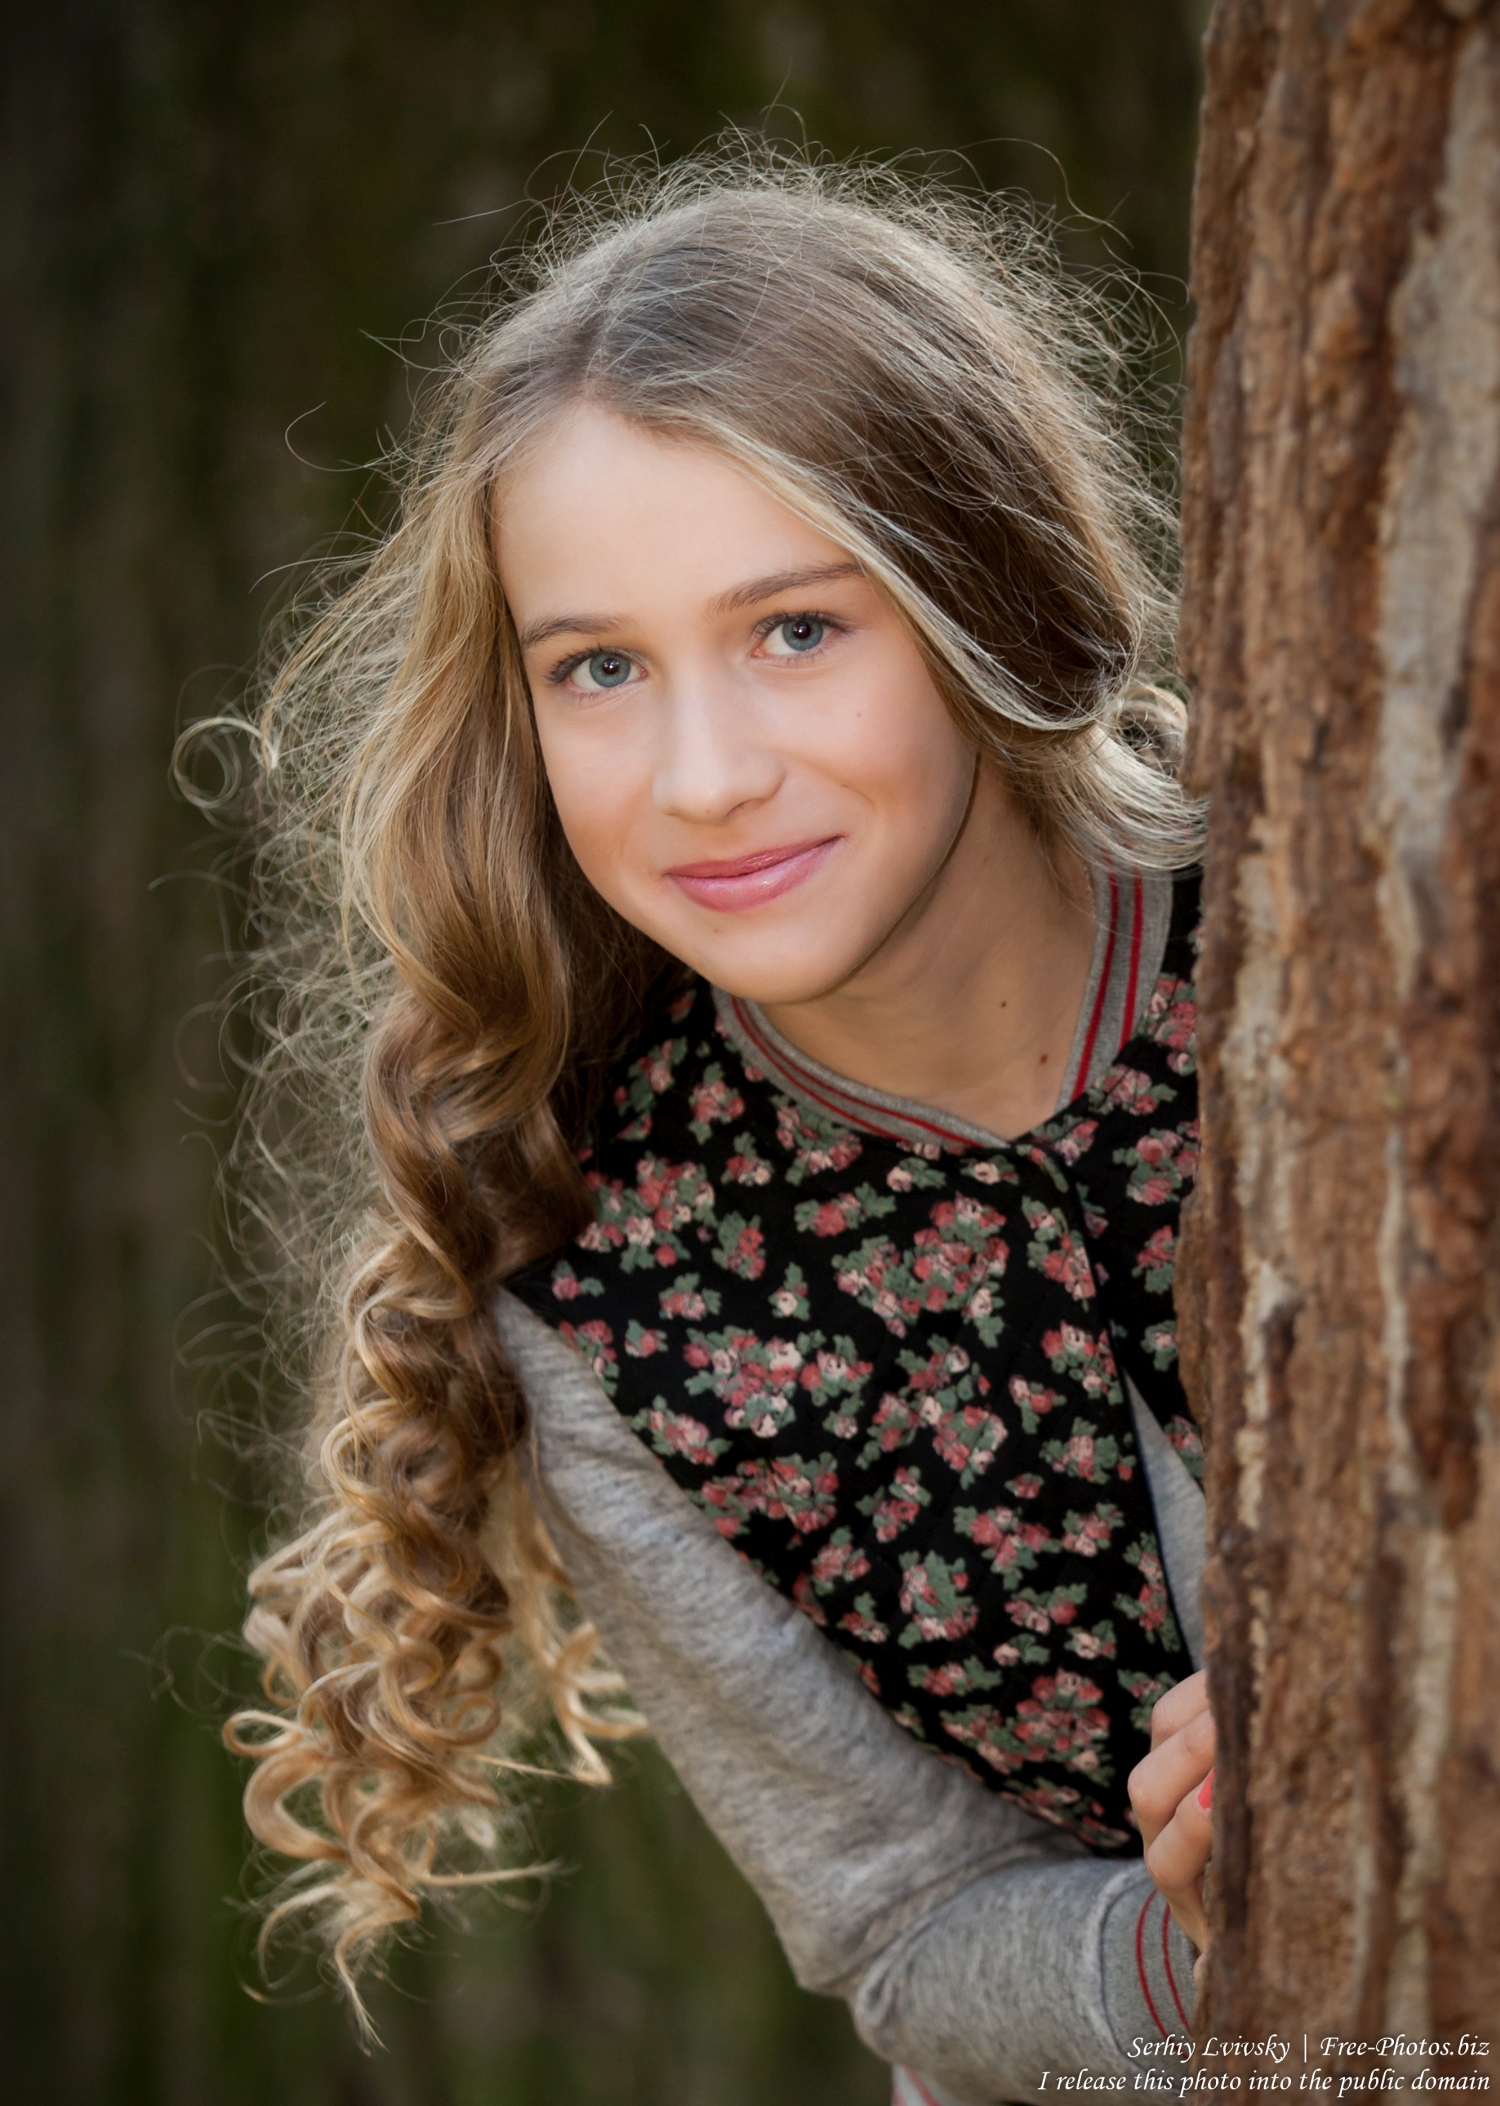 a_13-year-old_girl_photographed_by_serhiy_lvivsky_in_october_2015_06